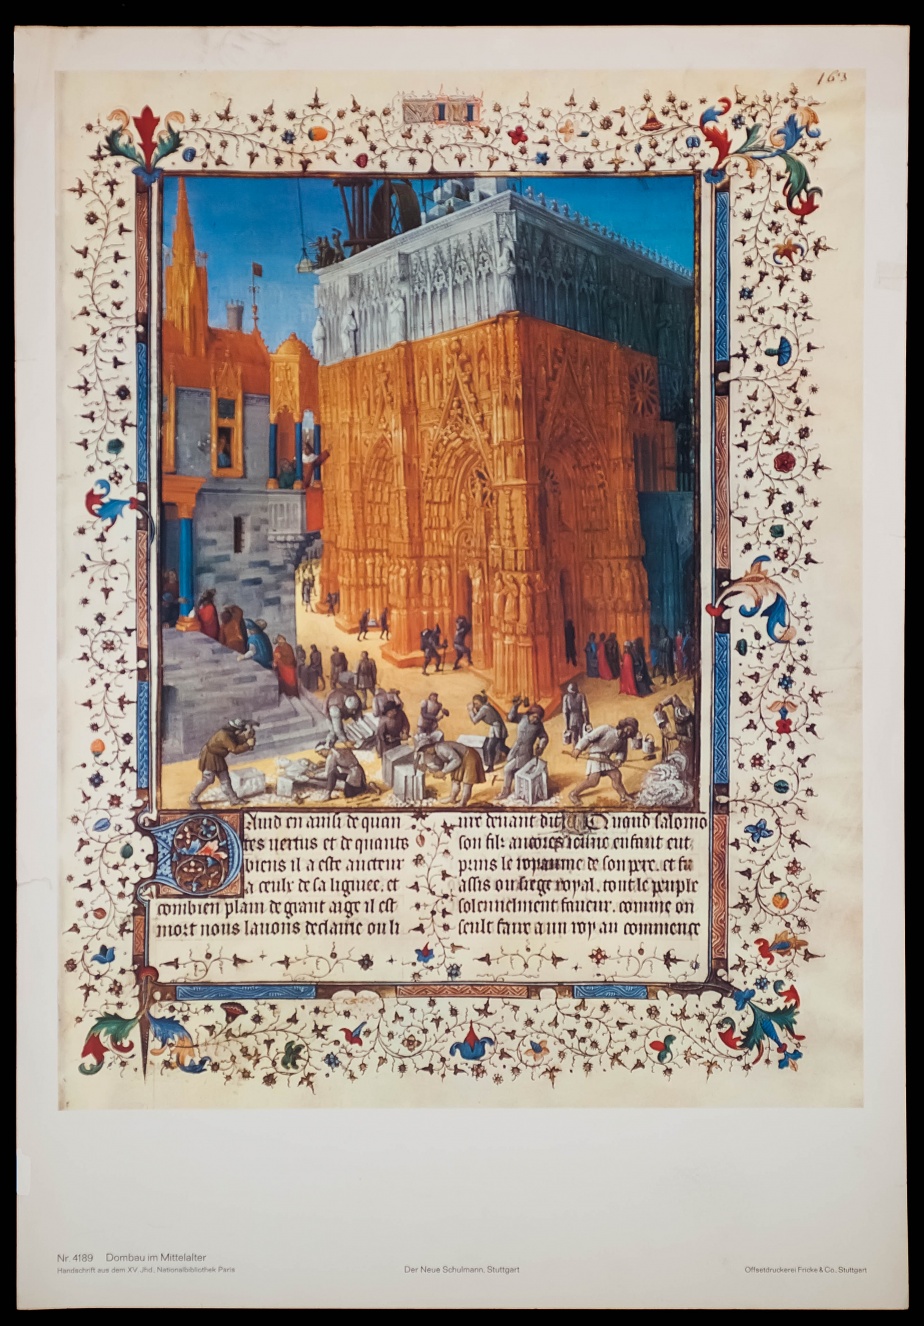 Construction of a cathedral in the middle Ages